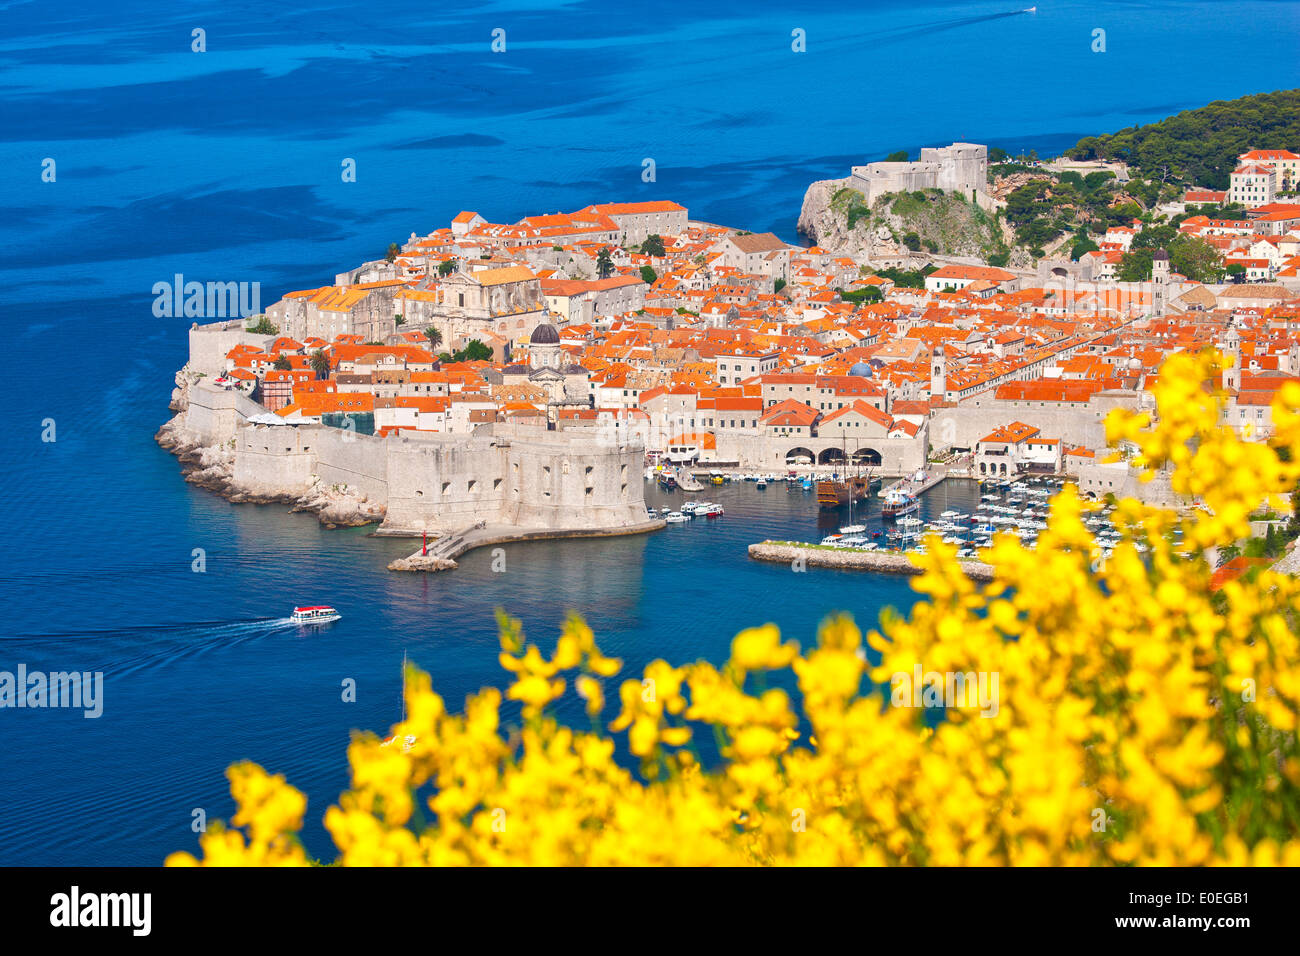 Dubrovnik old town, Croatia. Dubrovnik and flowers. Stock Photo